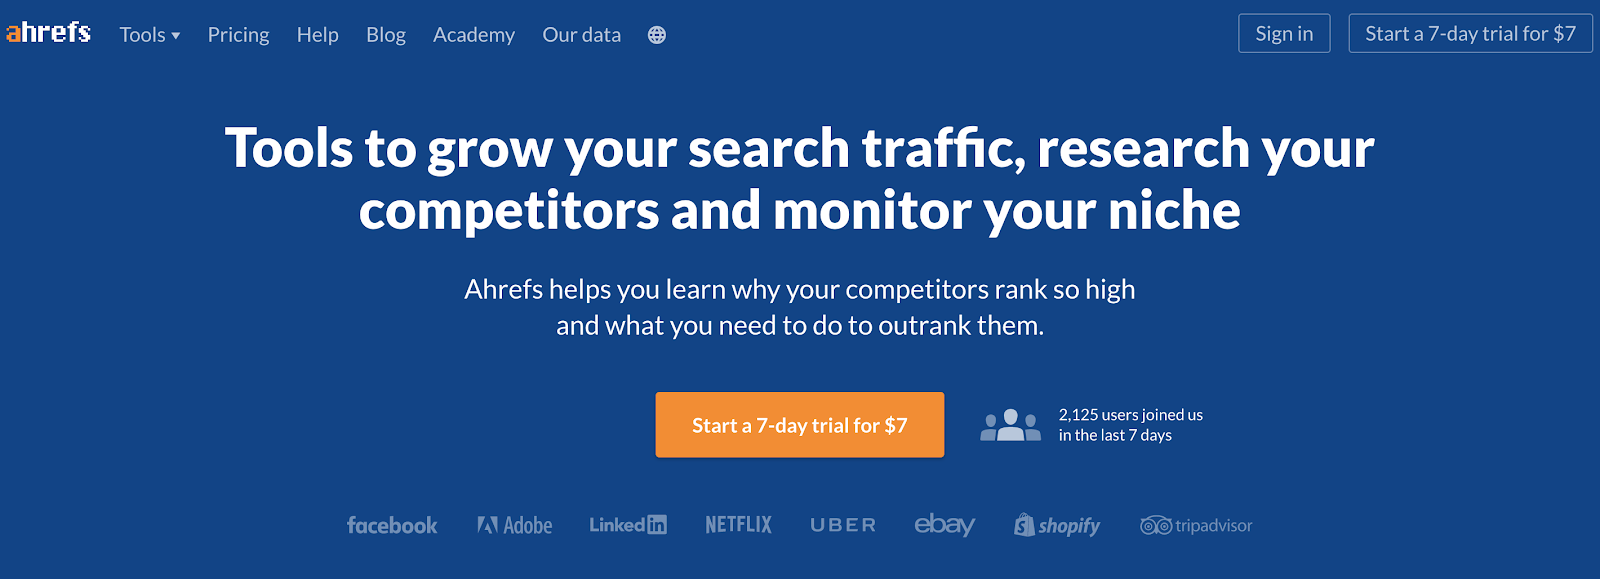 Ahrefs Keyword Research Tool for Bloggers Homepage Screenshot